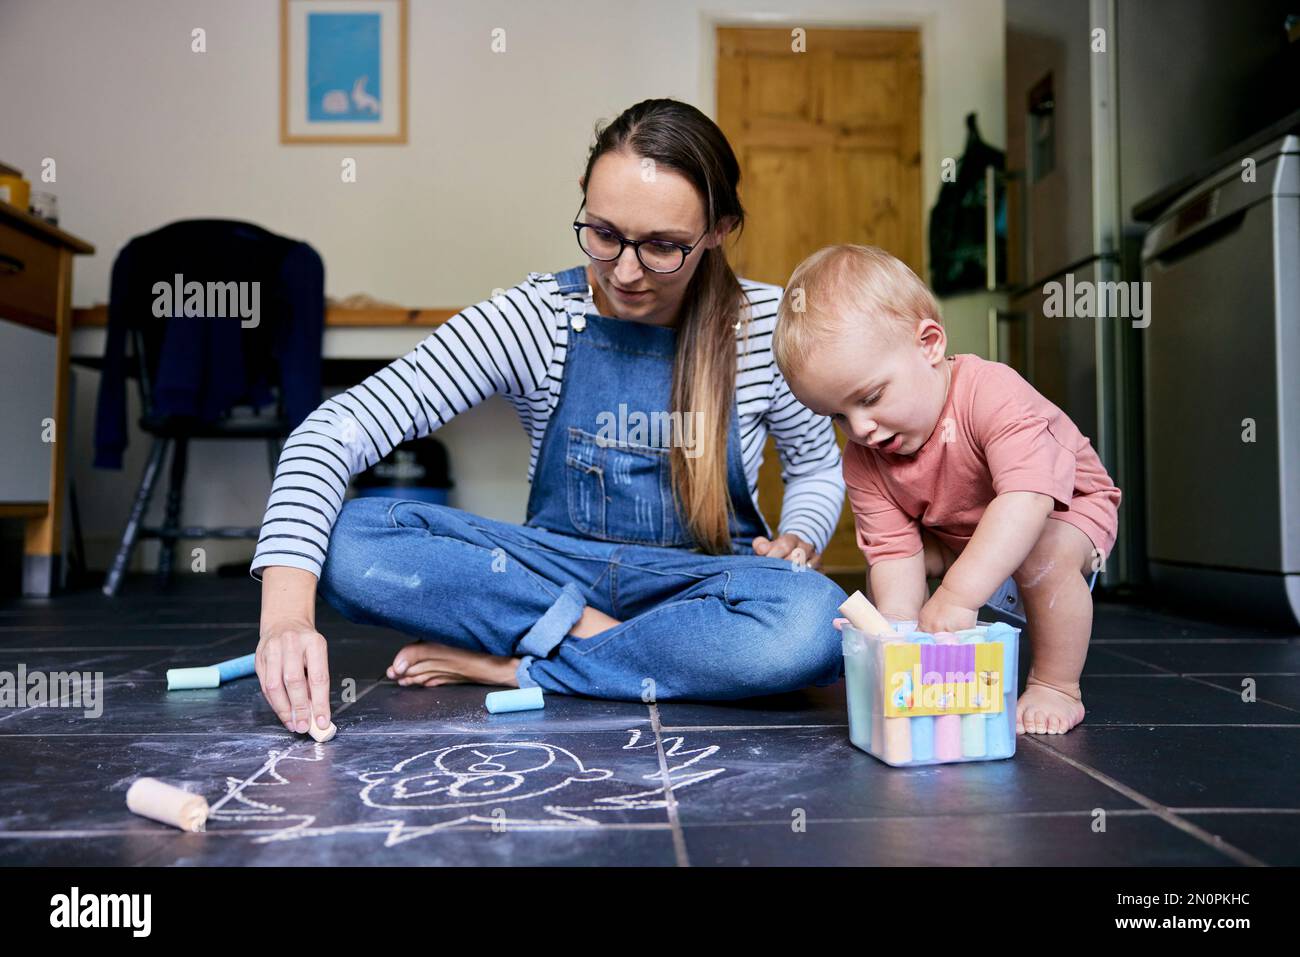 Mother and toddler drawing with chalks together on a tiled kitchen floor Stock Photo